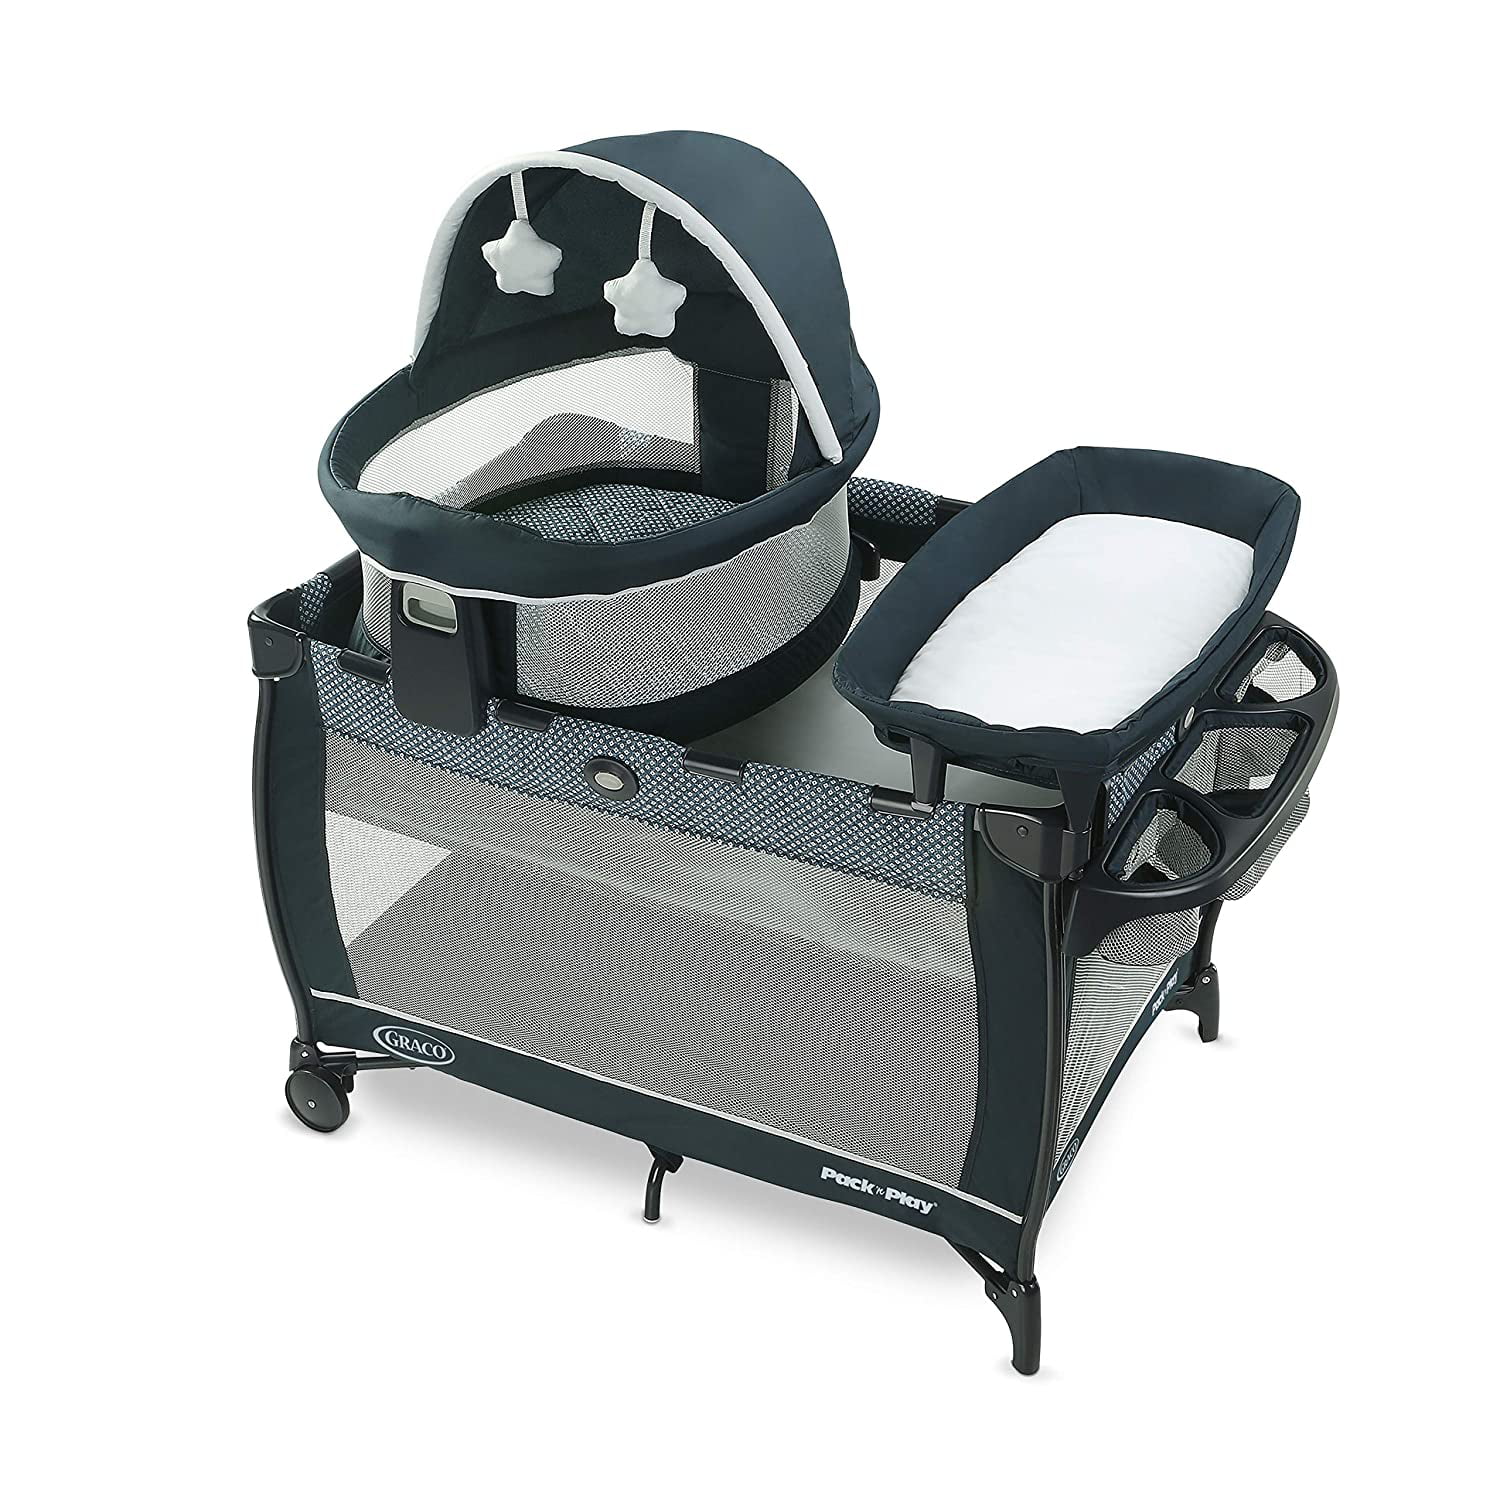 Graco Pack 'n Play Travel Dome LX Playard | Includes Portable 